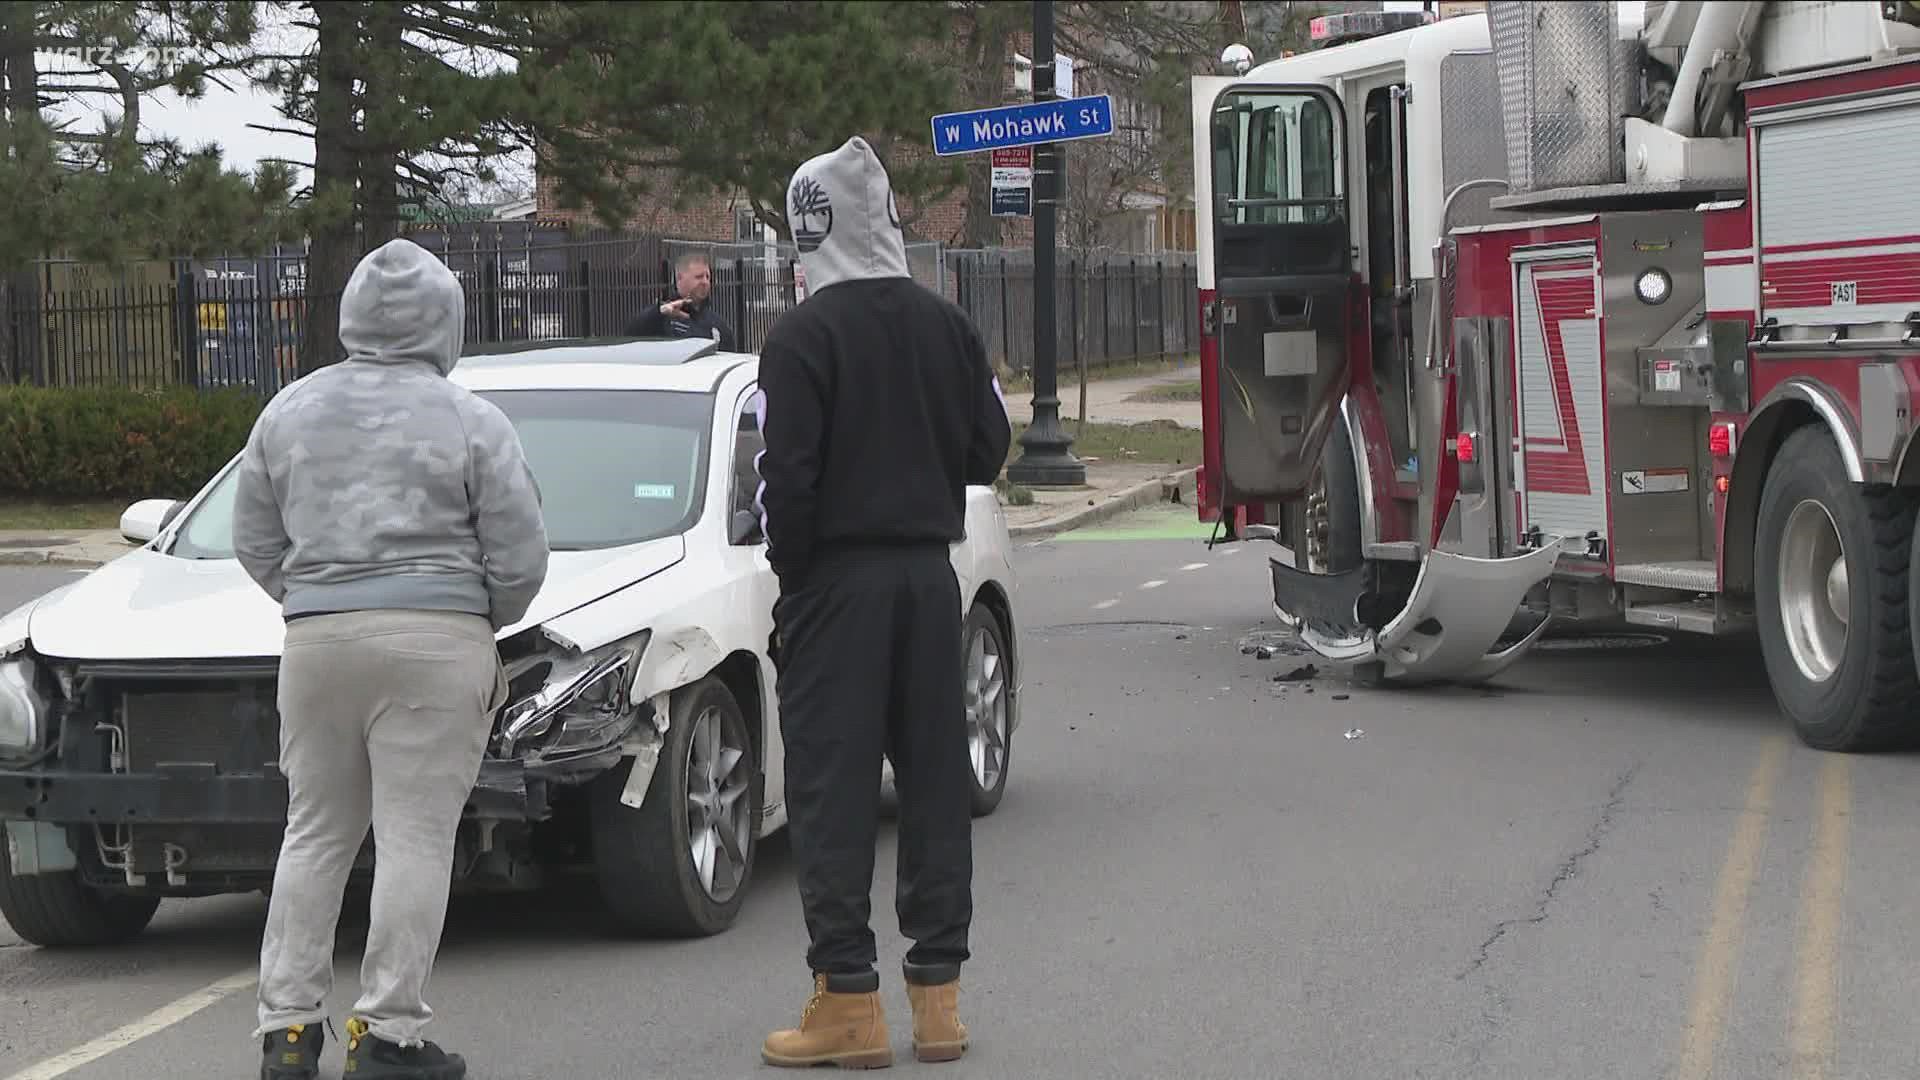 A fire truck and car collided this afternoon in the city of Buffalo on Niagara St. The car and truck sustained some damage but no injuries were reported.